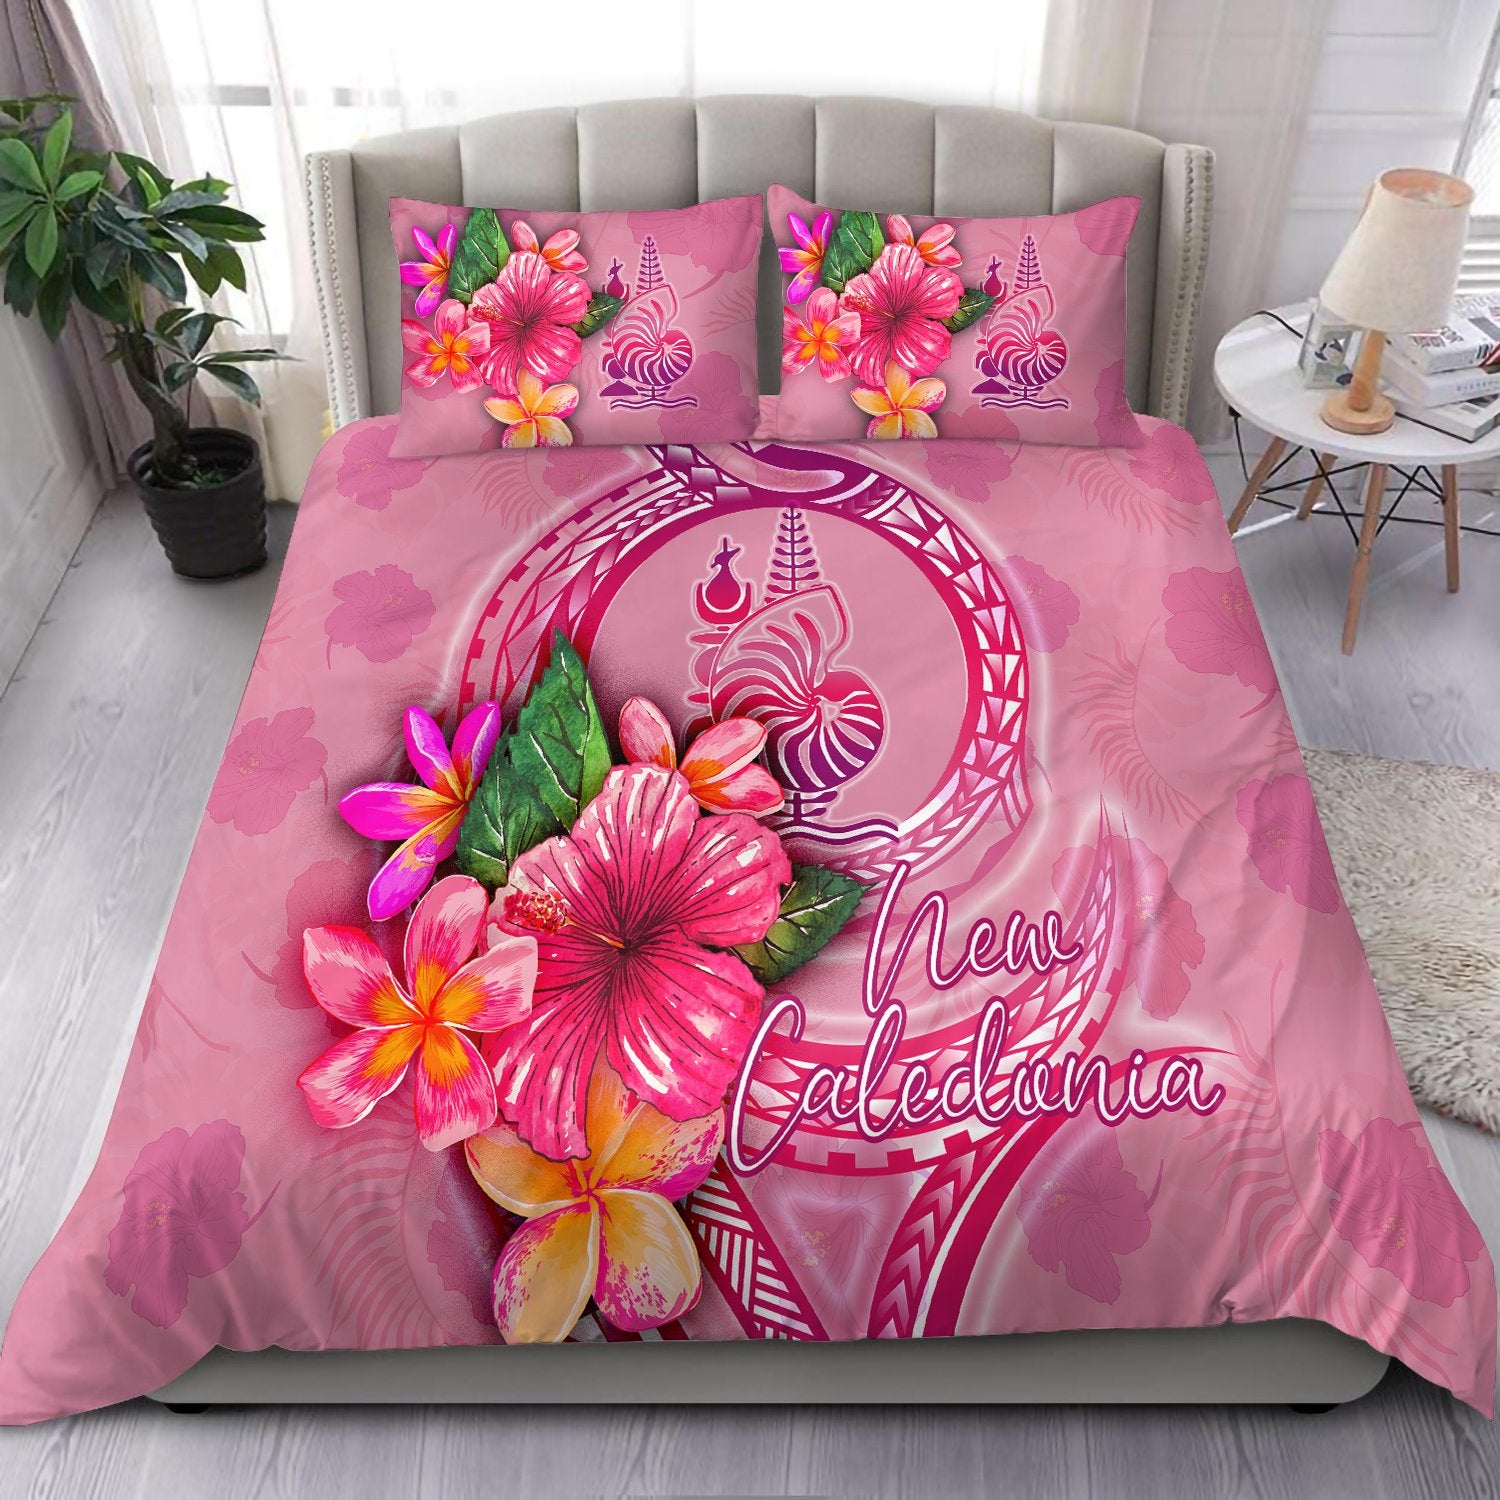 New Caledonia Polynesian Bedding Set - Floral With Seal Pink pink - Polynesian Pride